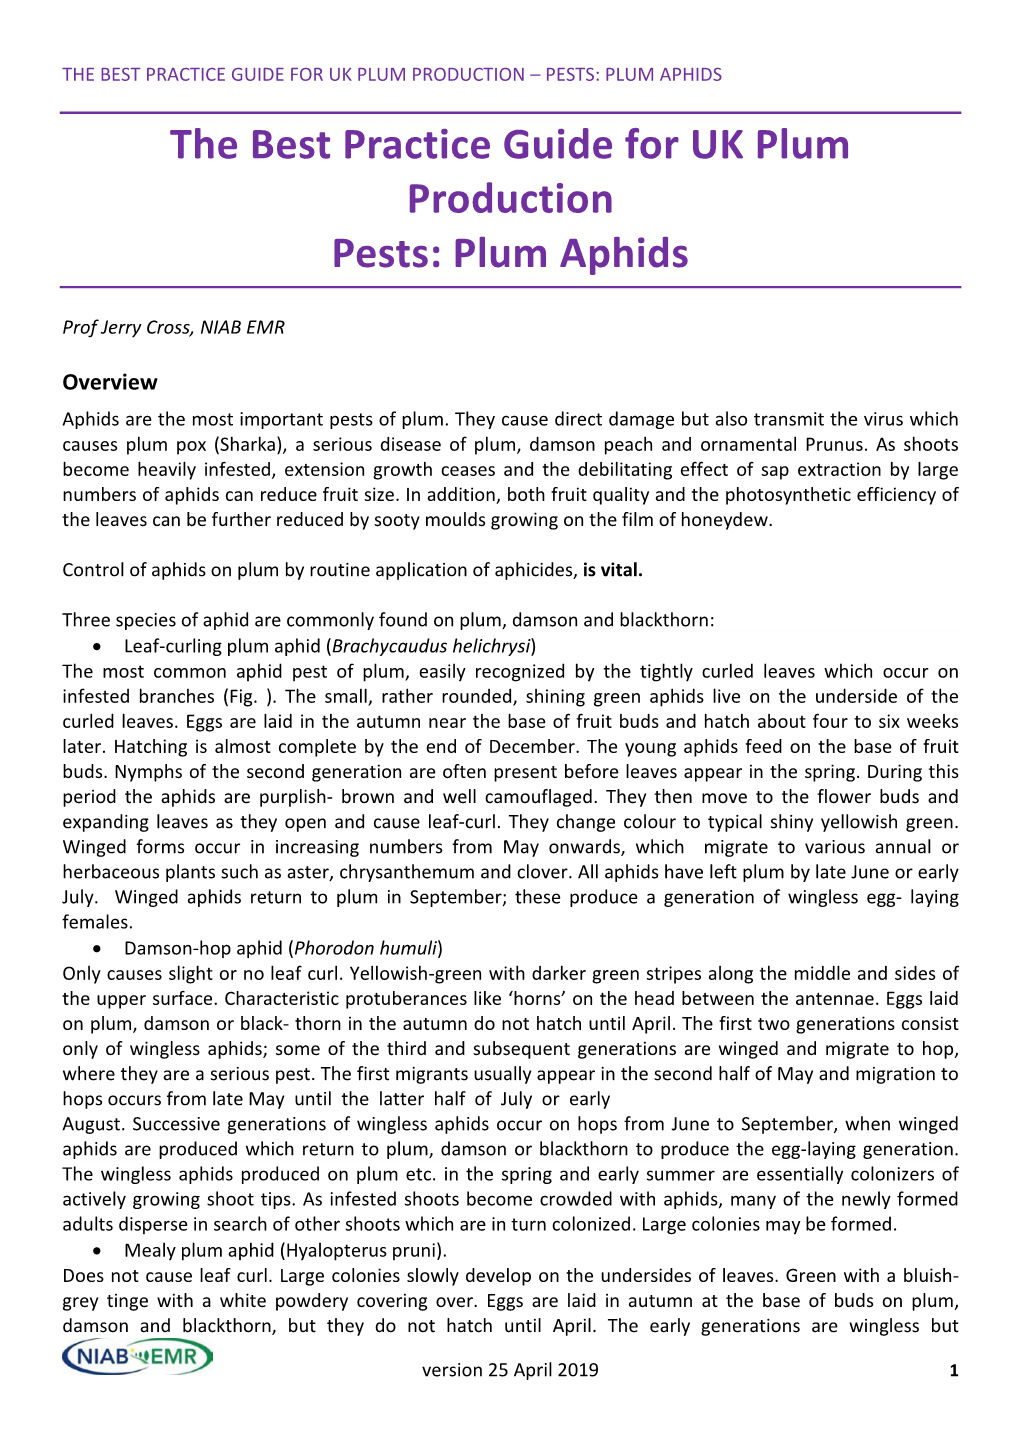 The Best Practice Guide for UK Plum Production Pests: Plum Aphids